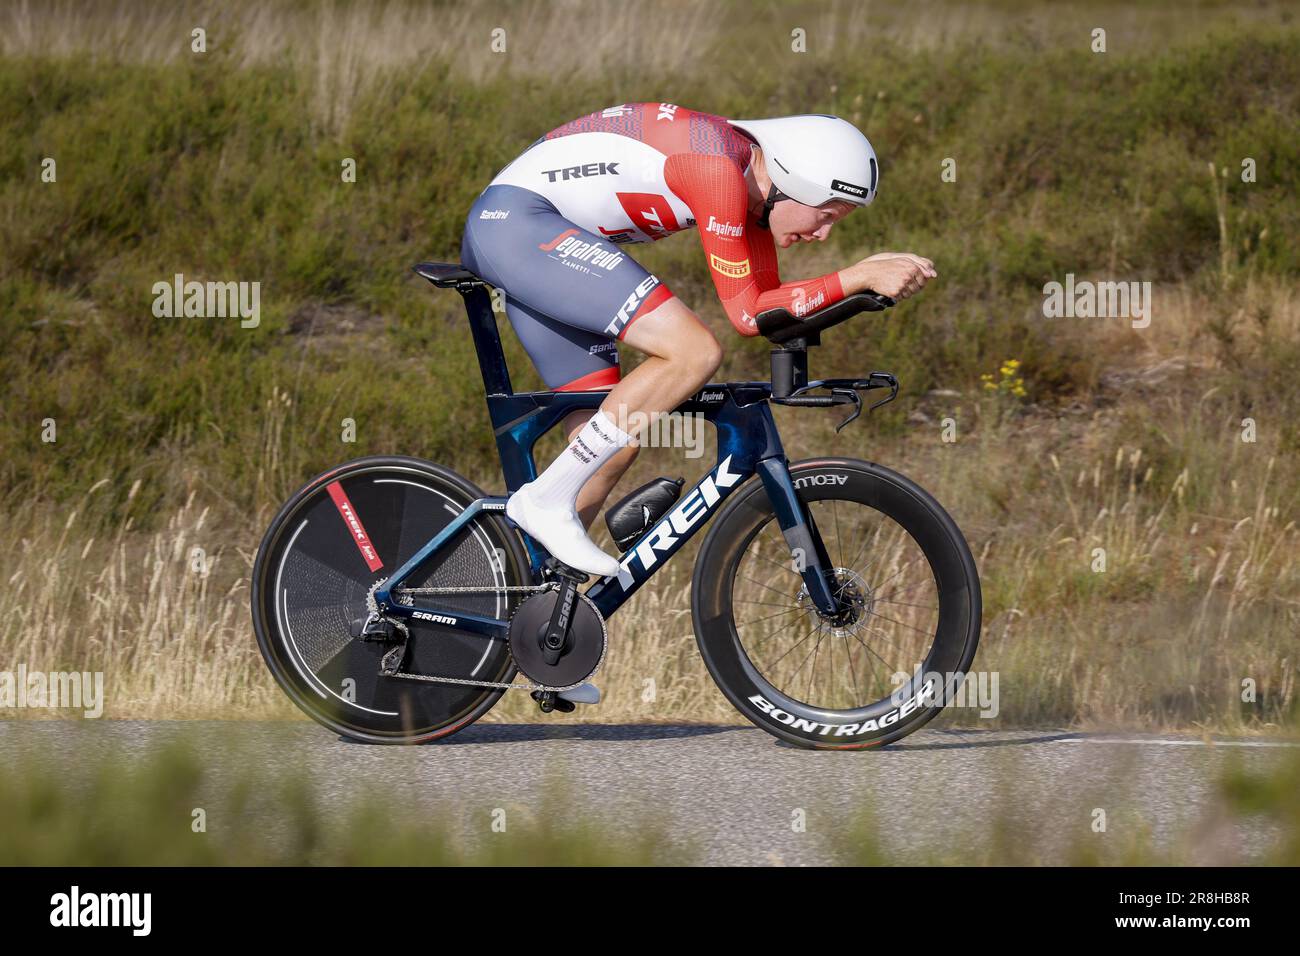 ELSPEET - Cyclist Daan Hoole during the Dutch time trial championship. The riders rode two laps of approximately 20 kilometers between the meadows and forest paths of the Veluwe. ANP BAS CZERWINSKI netherlands out - belgium out Stock Photo